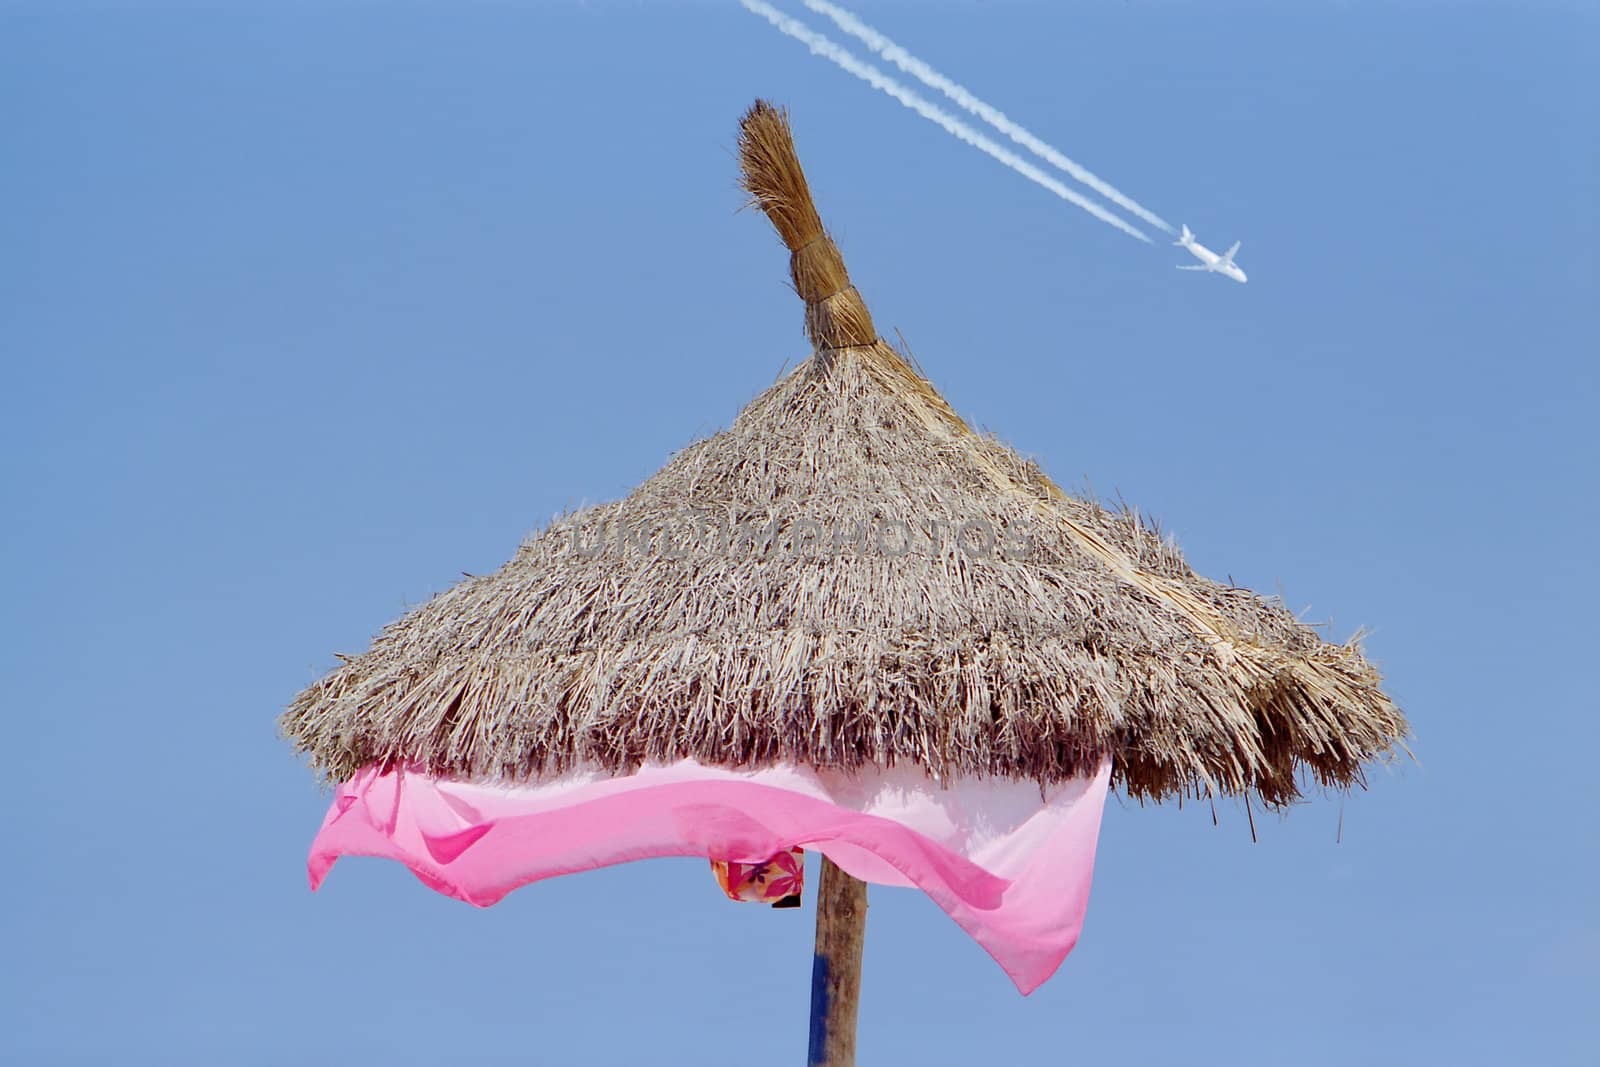 A sun shade of straw against a clear blue sky with an airplane painting white trails, suggesting the consept of summer tourism.